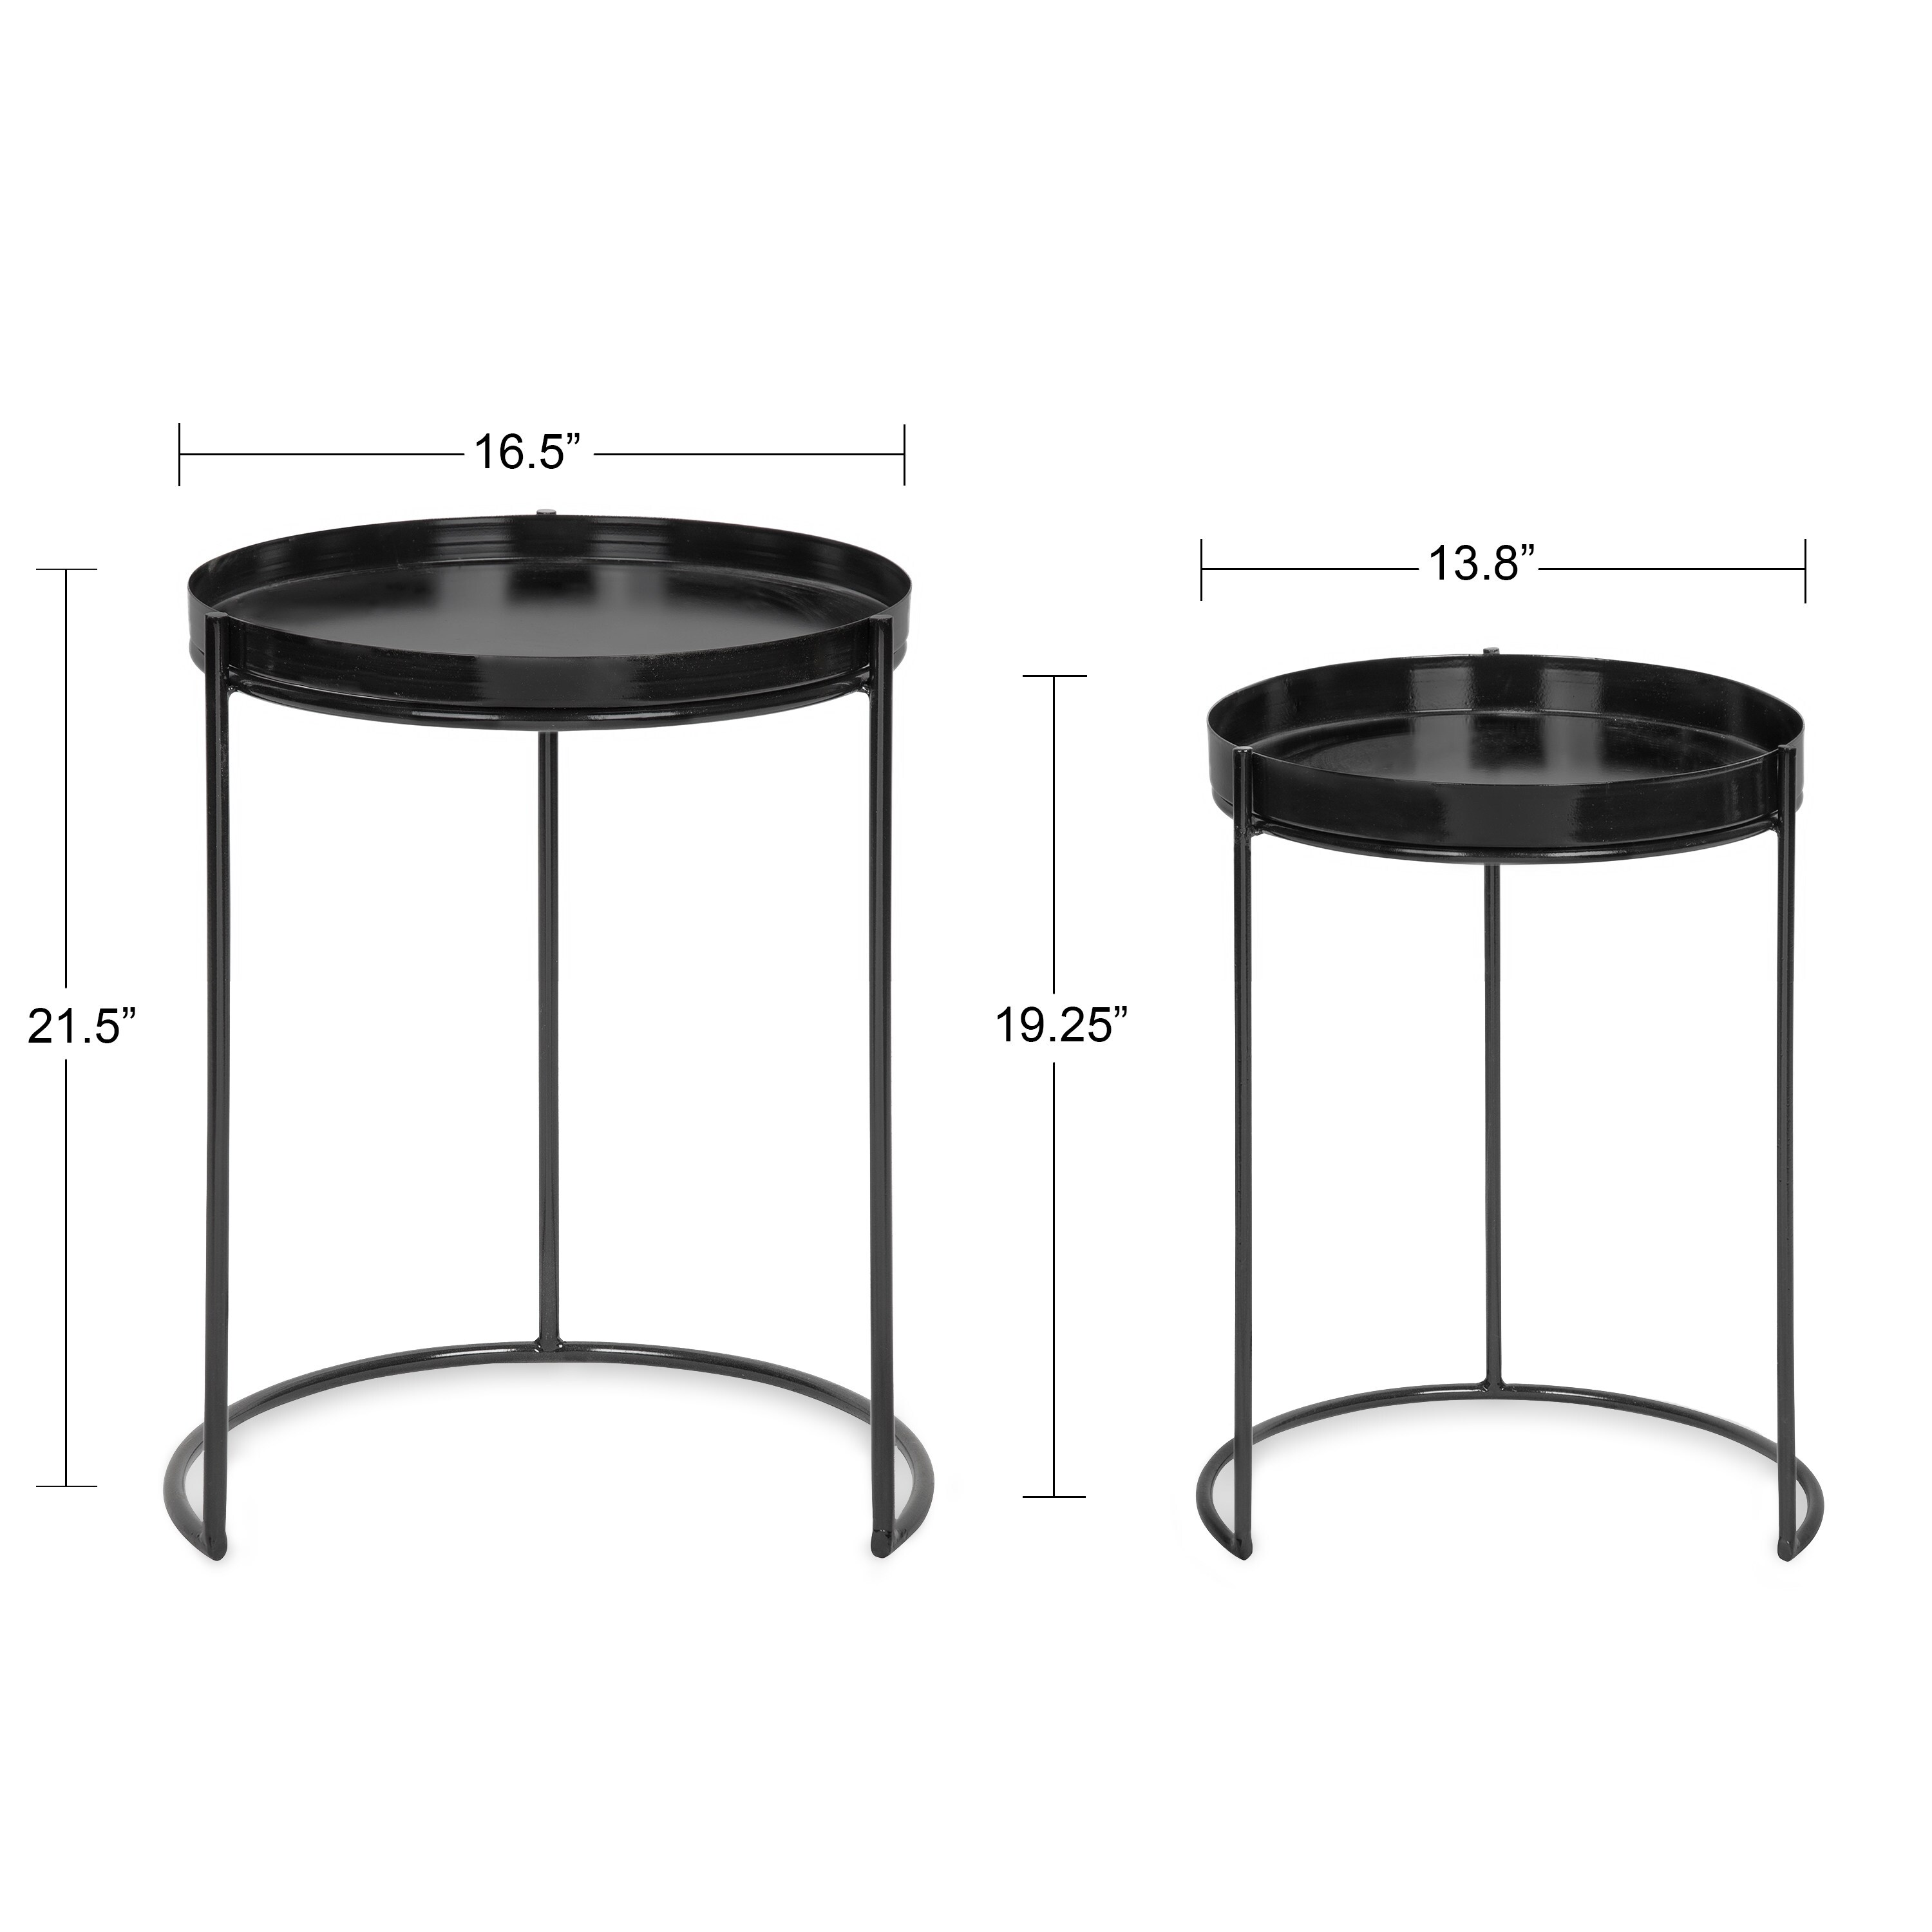 Kate and Laurel Presti Black Metal Round Modern End Table at Lowes.com